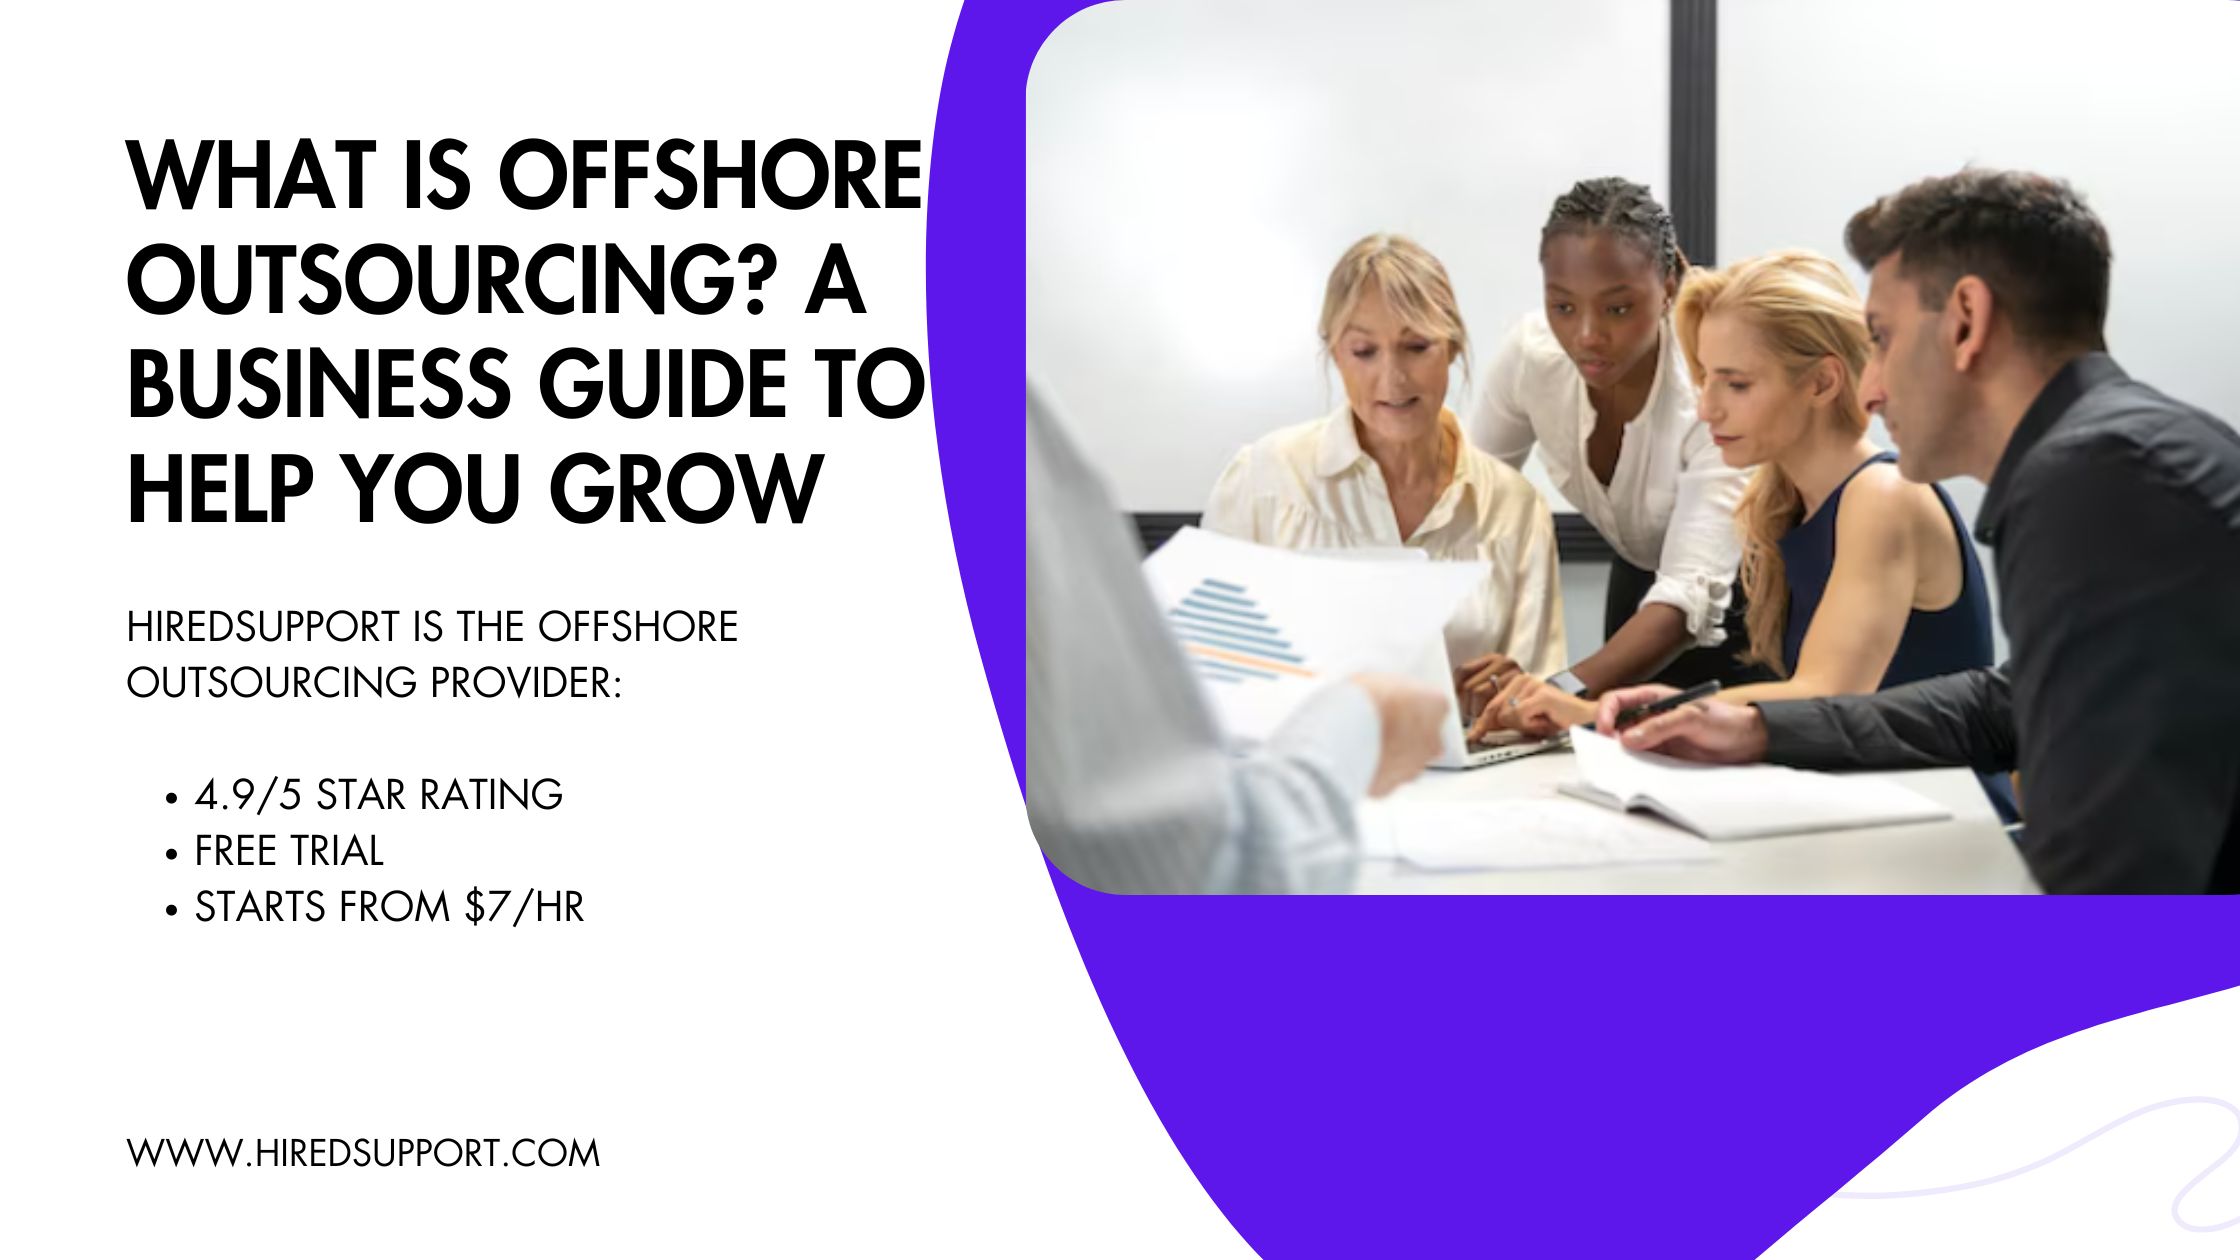 What is Offshore Outsourcing? A Business Guide to Help you Grow